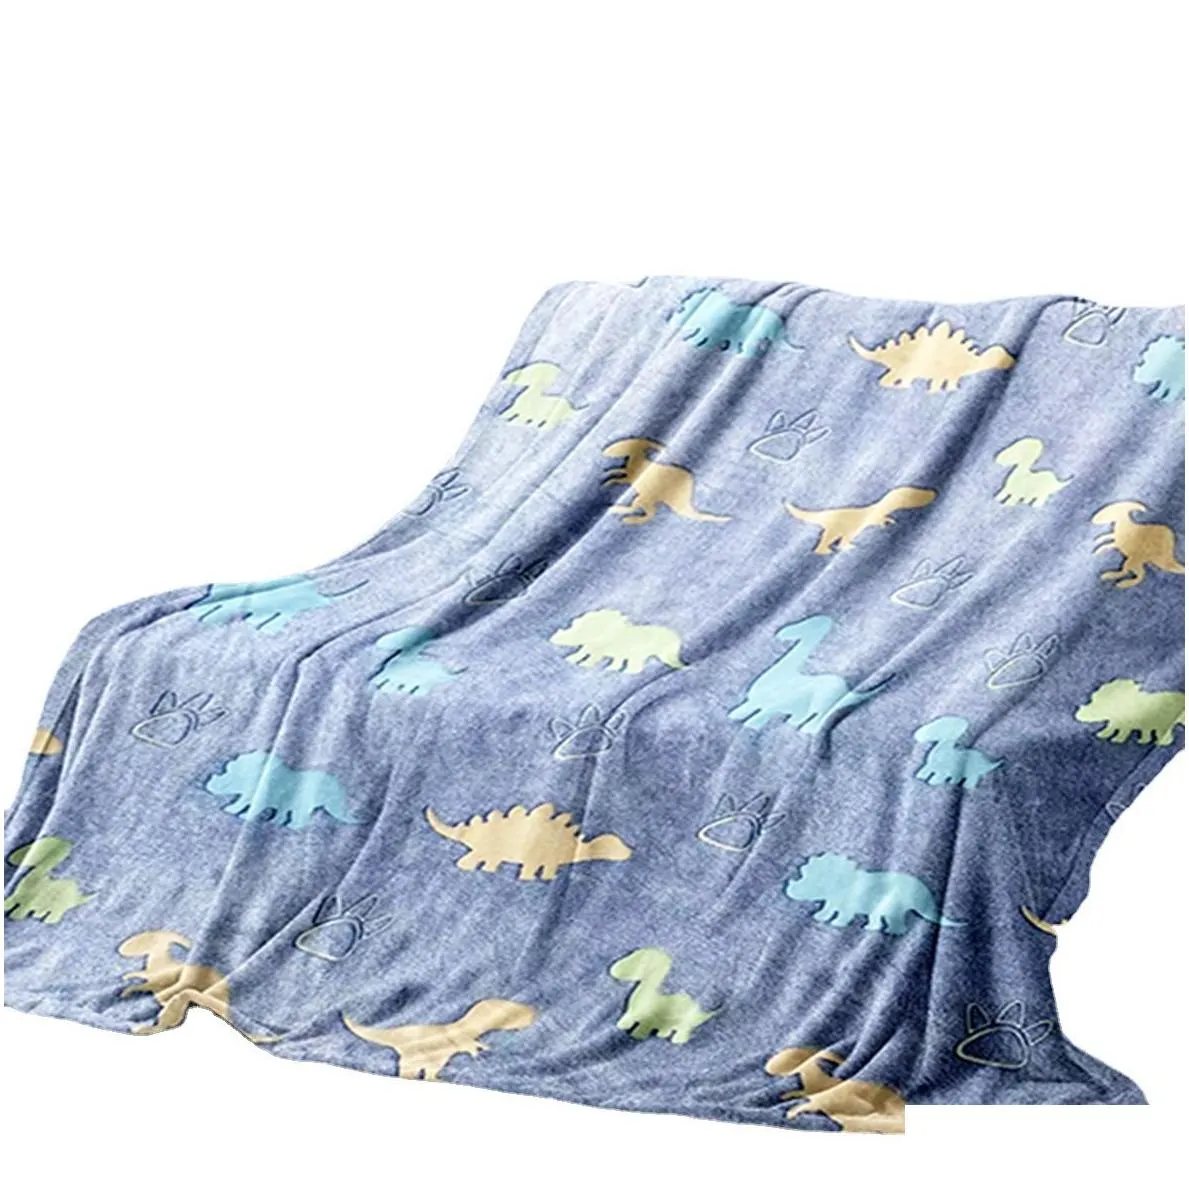 Blanket 1Pc Glow In The Dark P Throw Soft And Cozy Flannel For Bed Sofa Office Birthday Thanksgiving Gift Drop Delivery Dhqwb